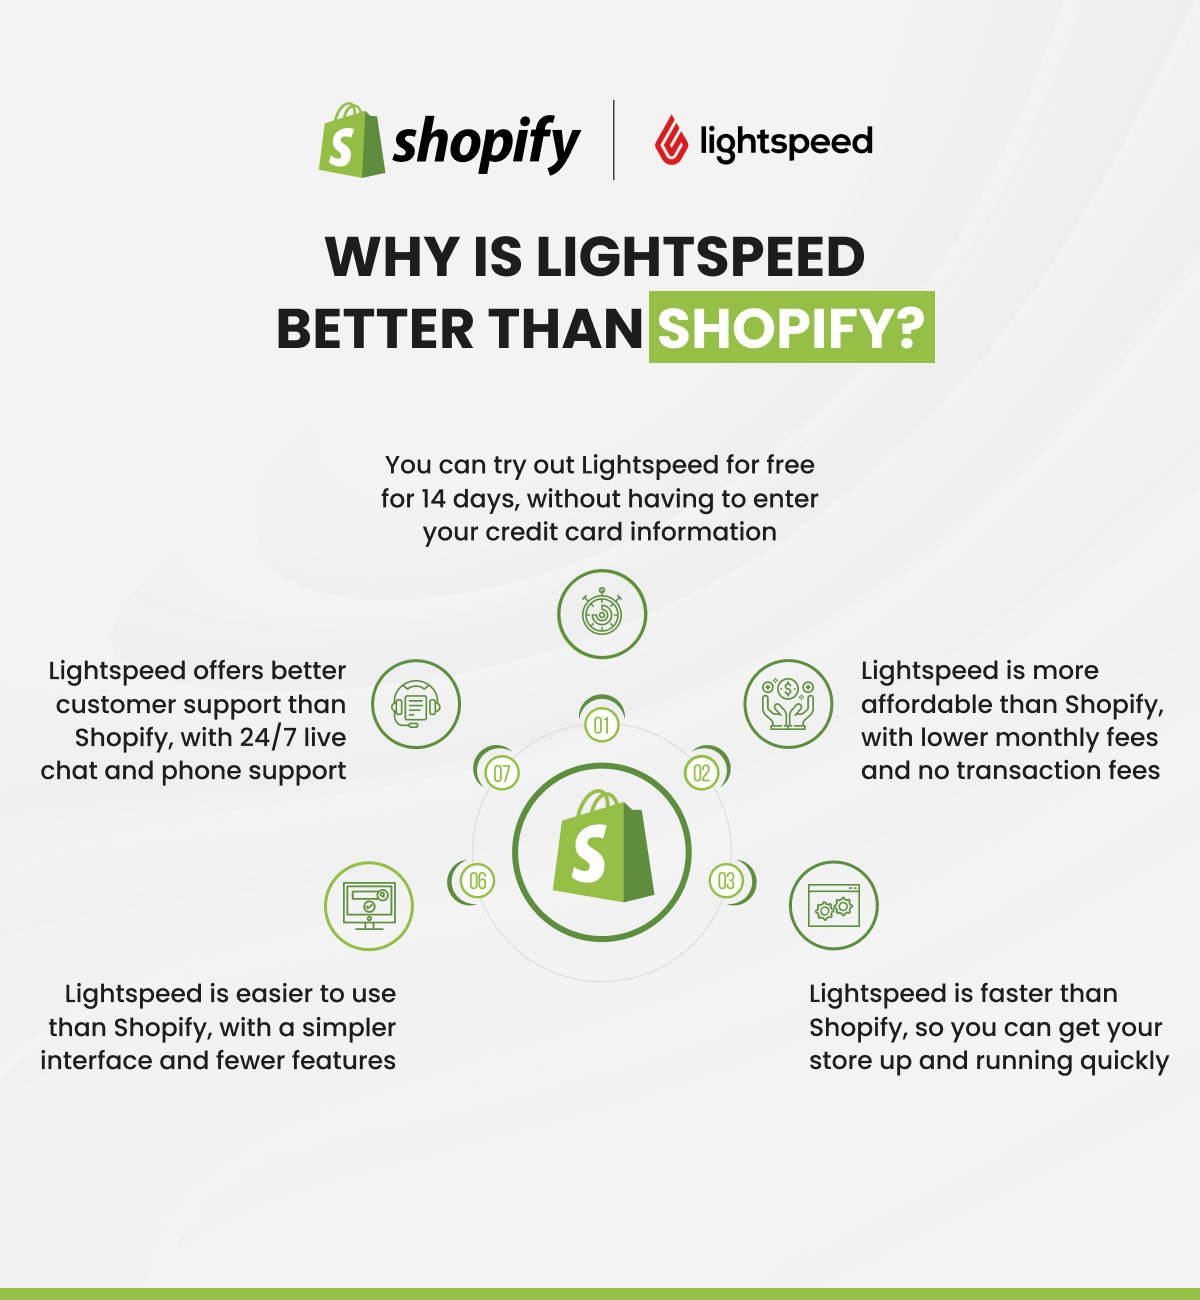 Why is Lightspeed better than Shopify